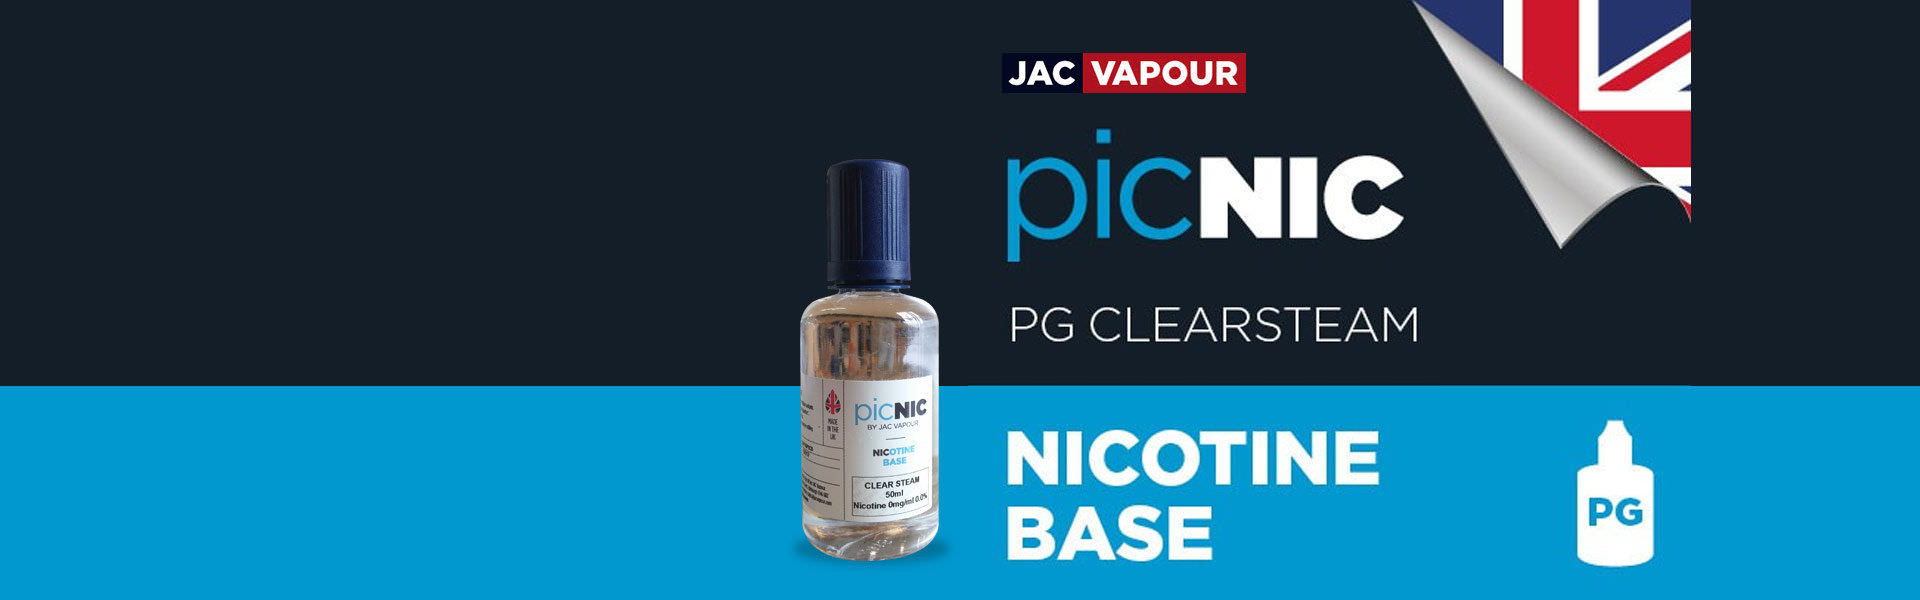 pg-base-clearsteam-picnic-jac-vapour-3